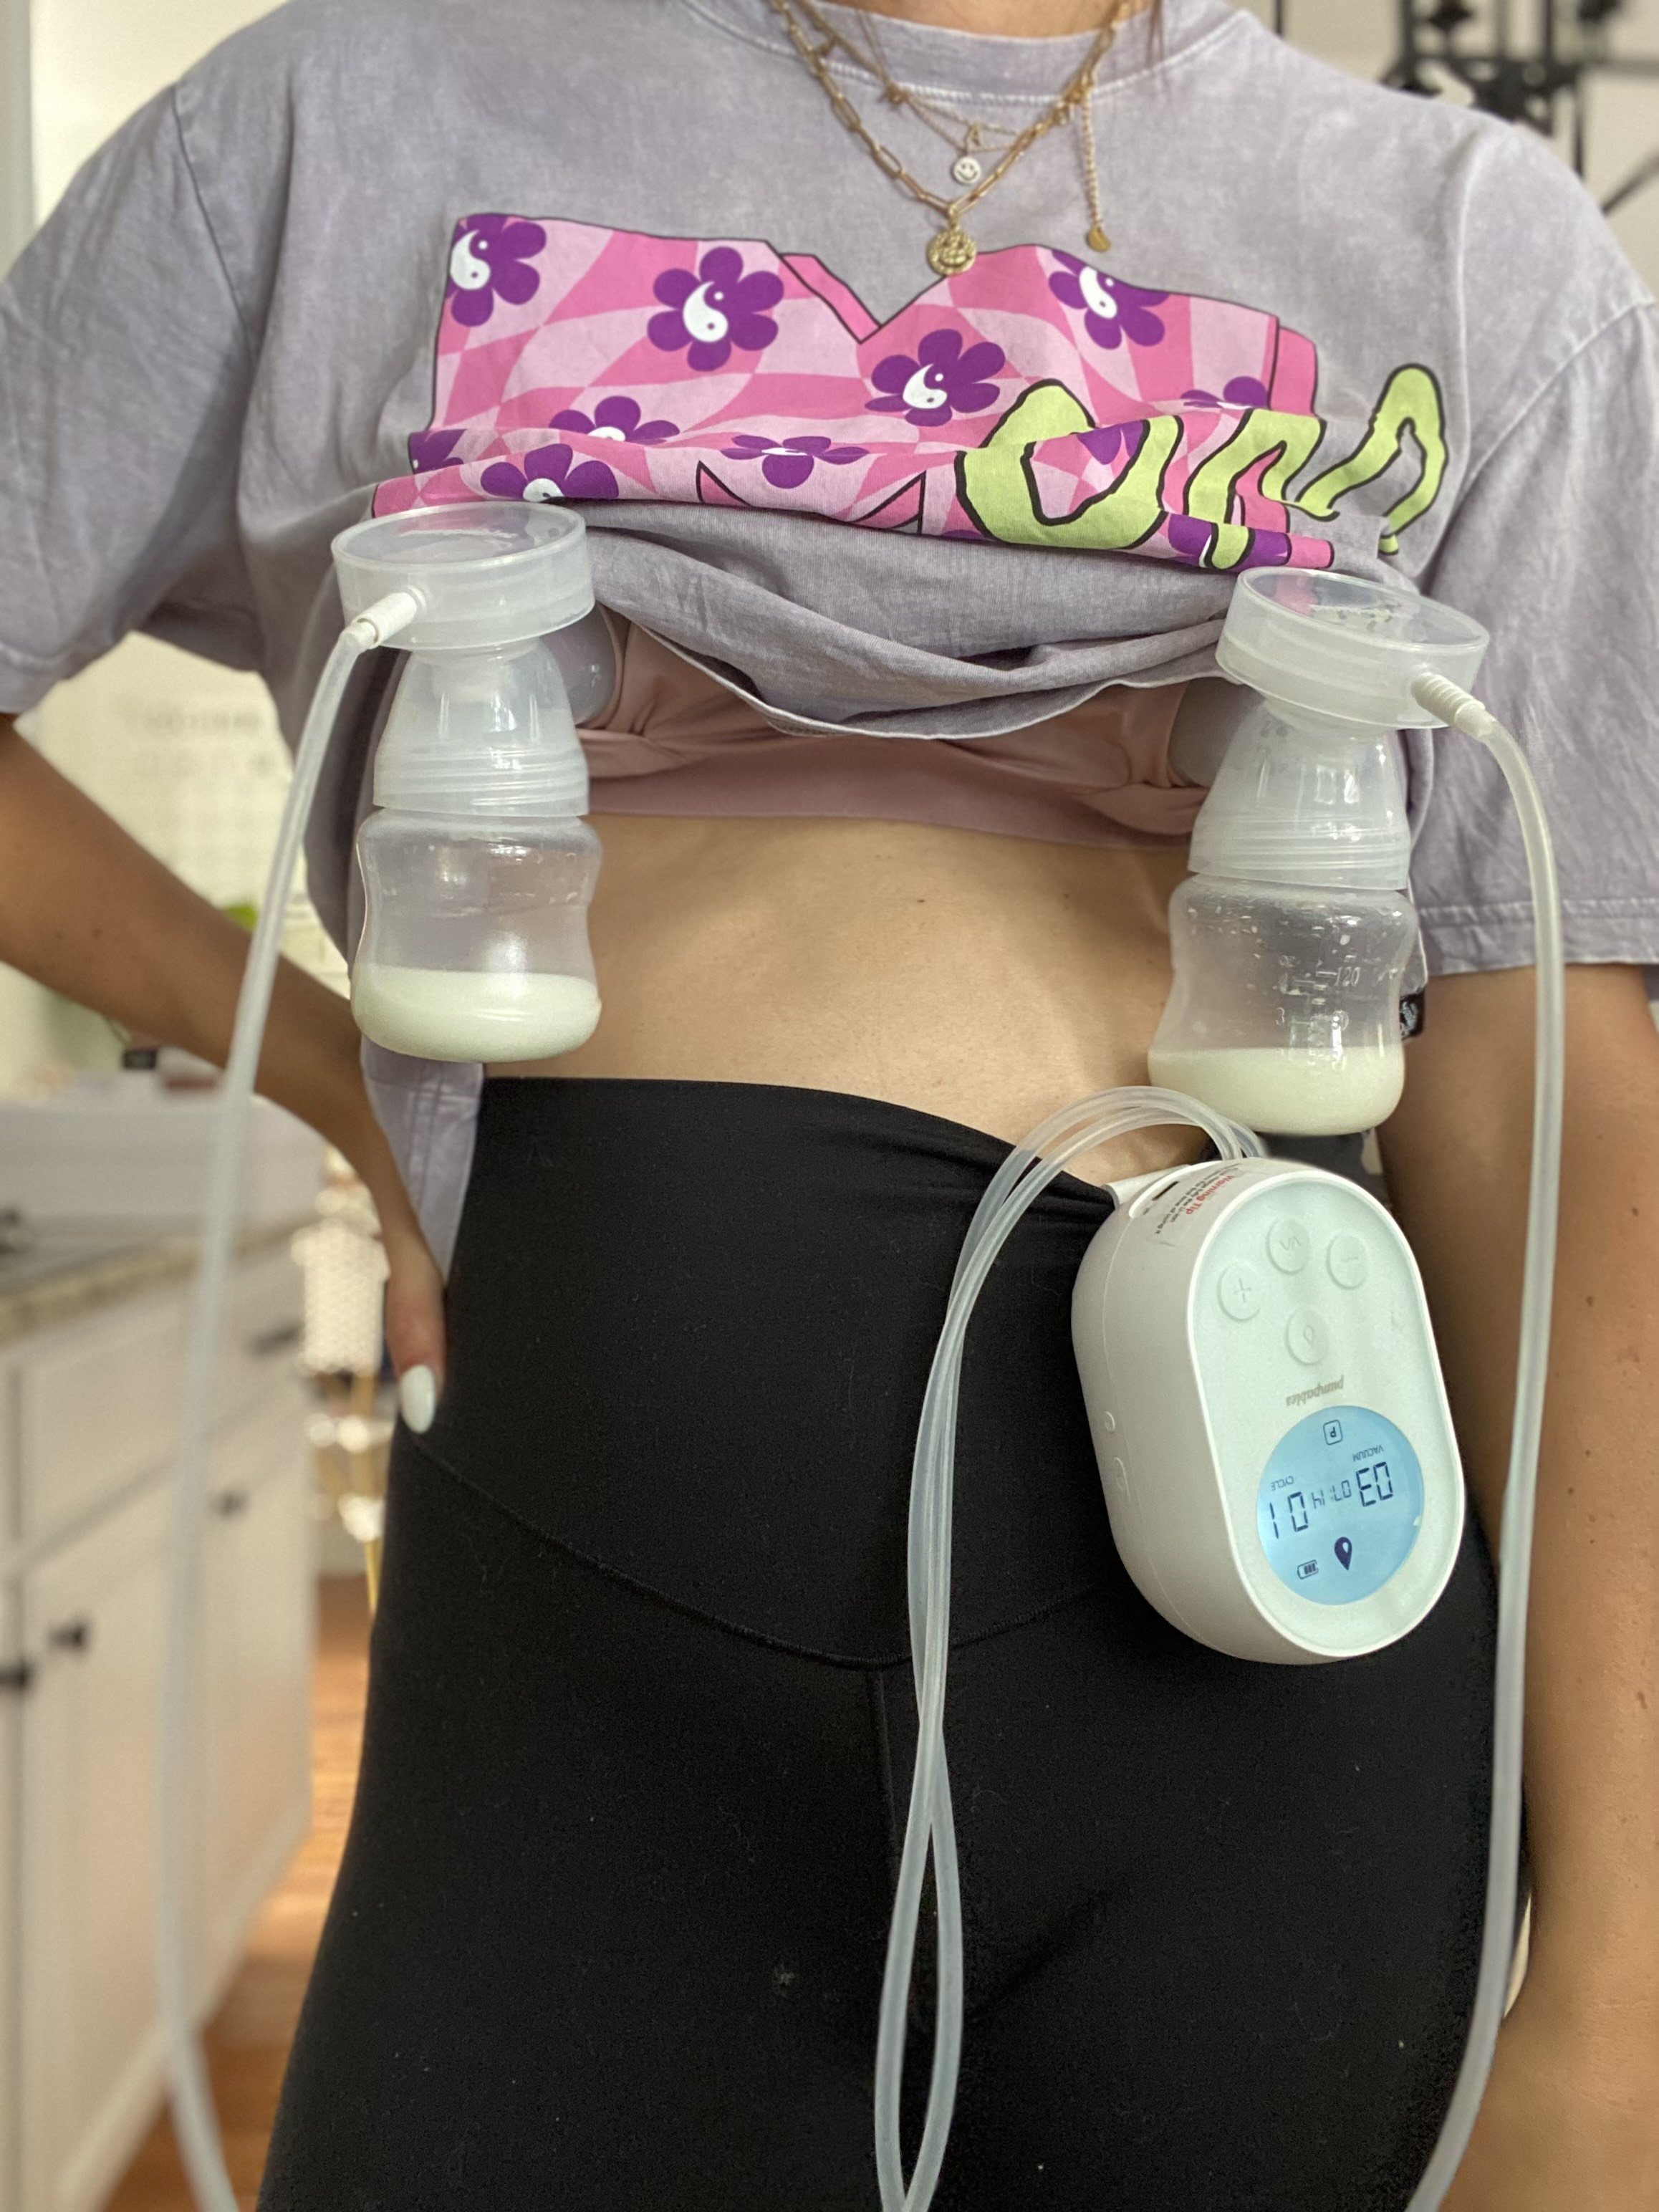 Motif Duo Double Electric Breast Pump with hands free pumping bra